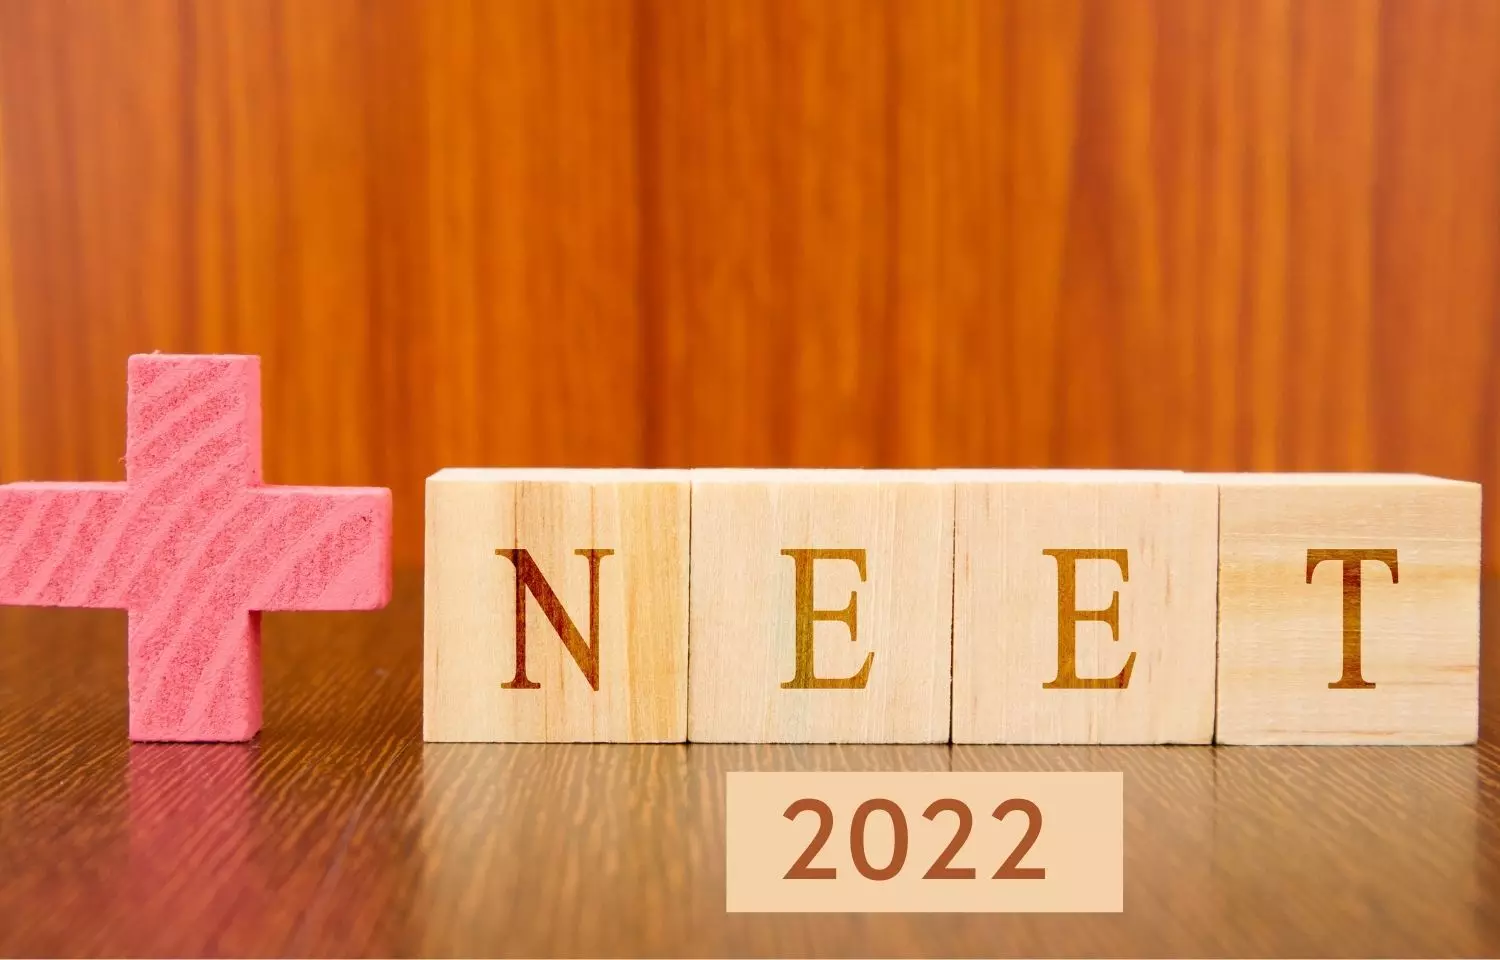 NEET 2022 Breaking News: MCC Counselling to start on 11th October, 2022, details